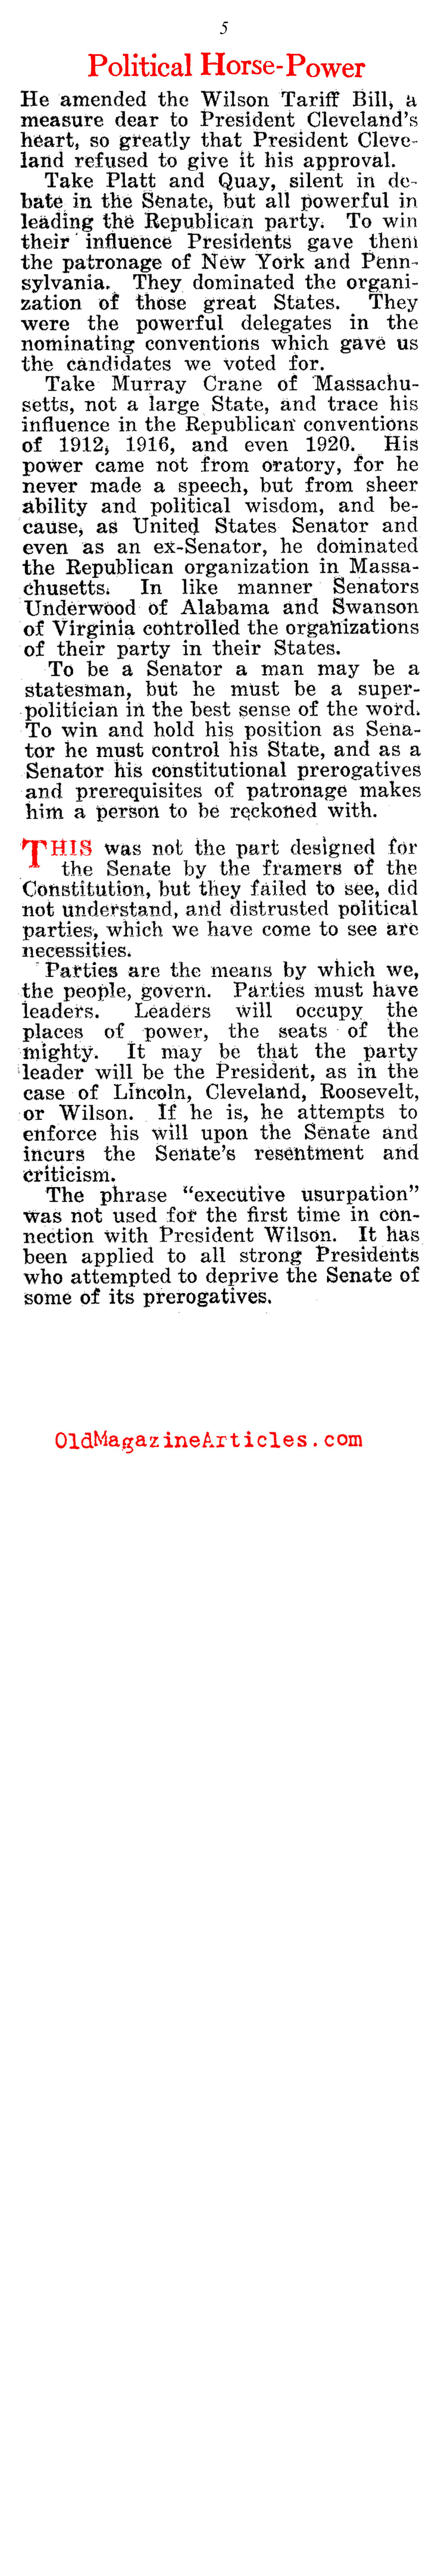 The Popularly-Elected Senate (American Legion Weekly, 1920)